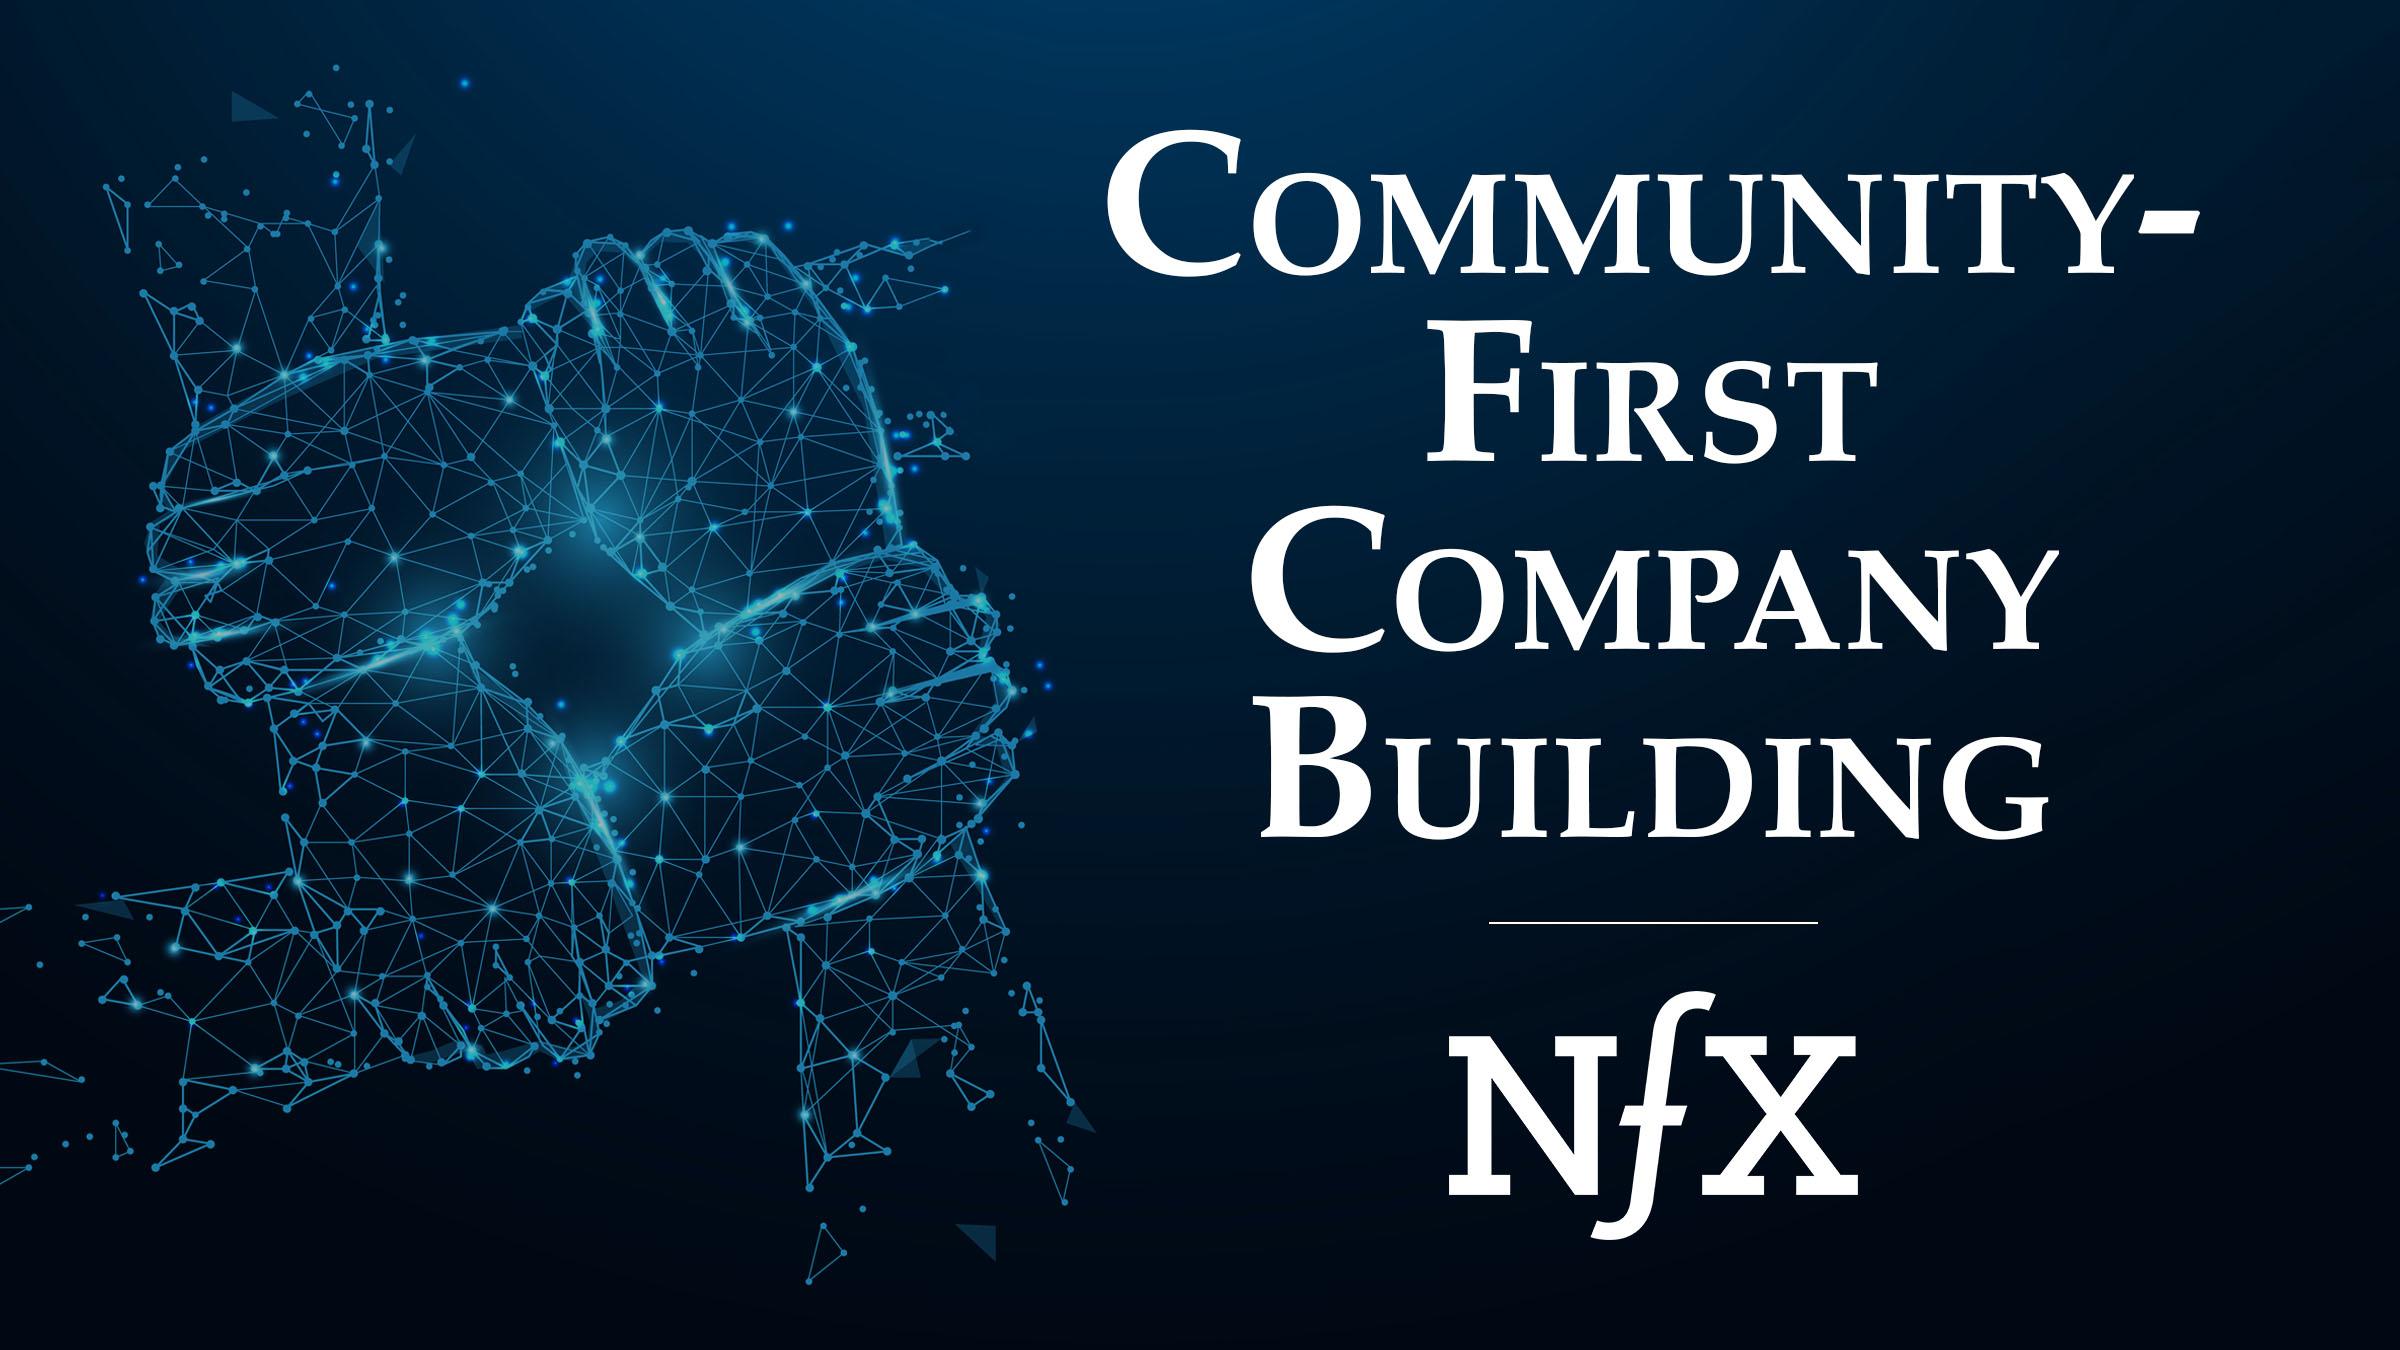 Community-First Company Building NFX